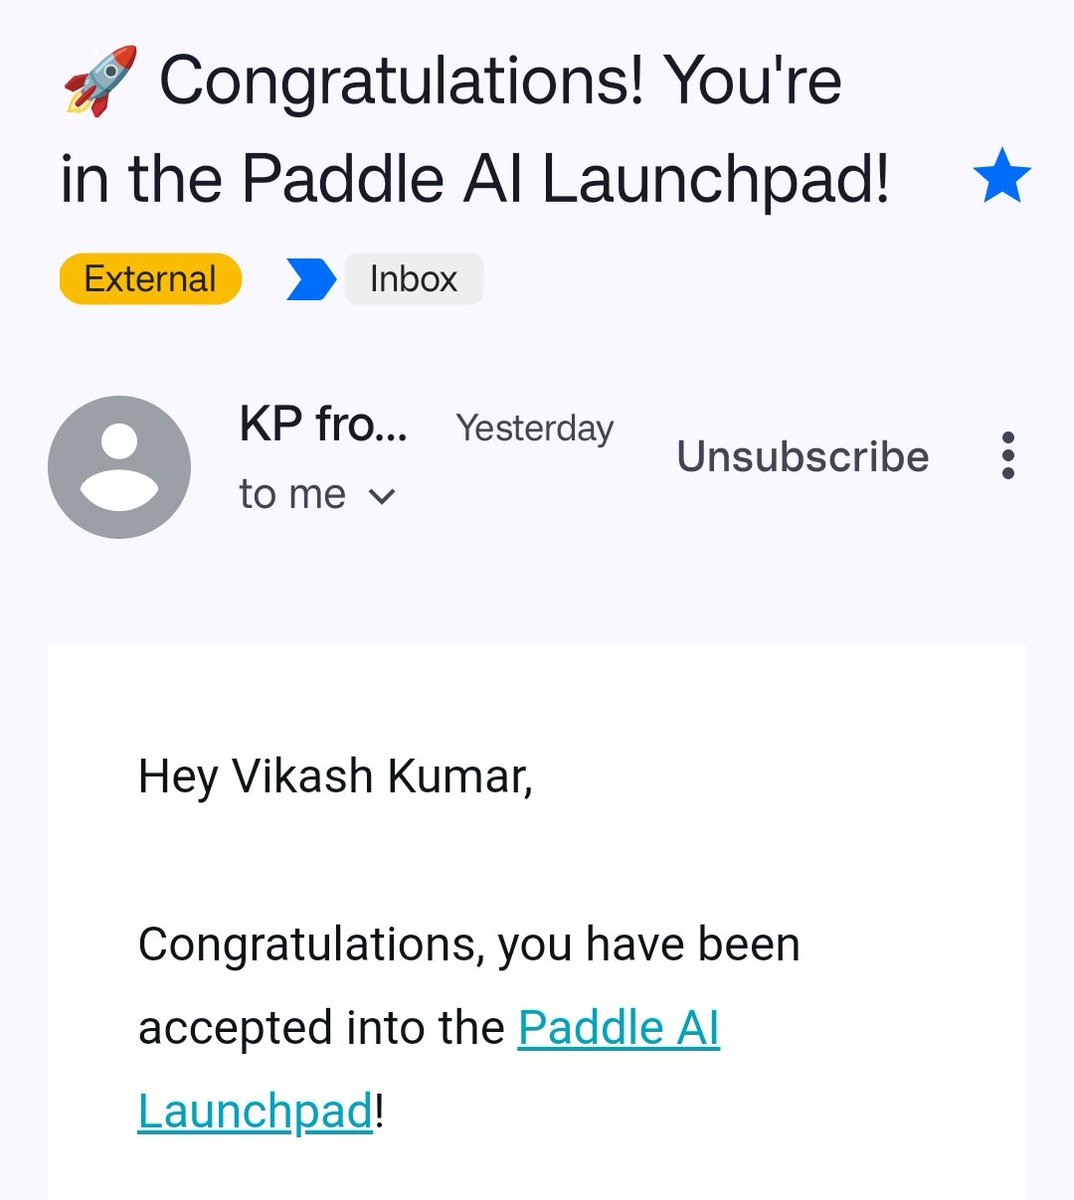 Super Excited 😊 to be shortlisted in @PaddleHQ AI Launchpad with @madhurjain Thanks @PaddleHQ @thisiskp_